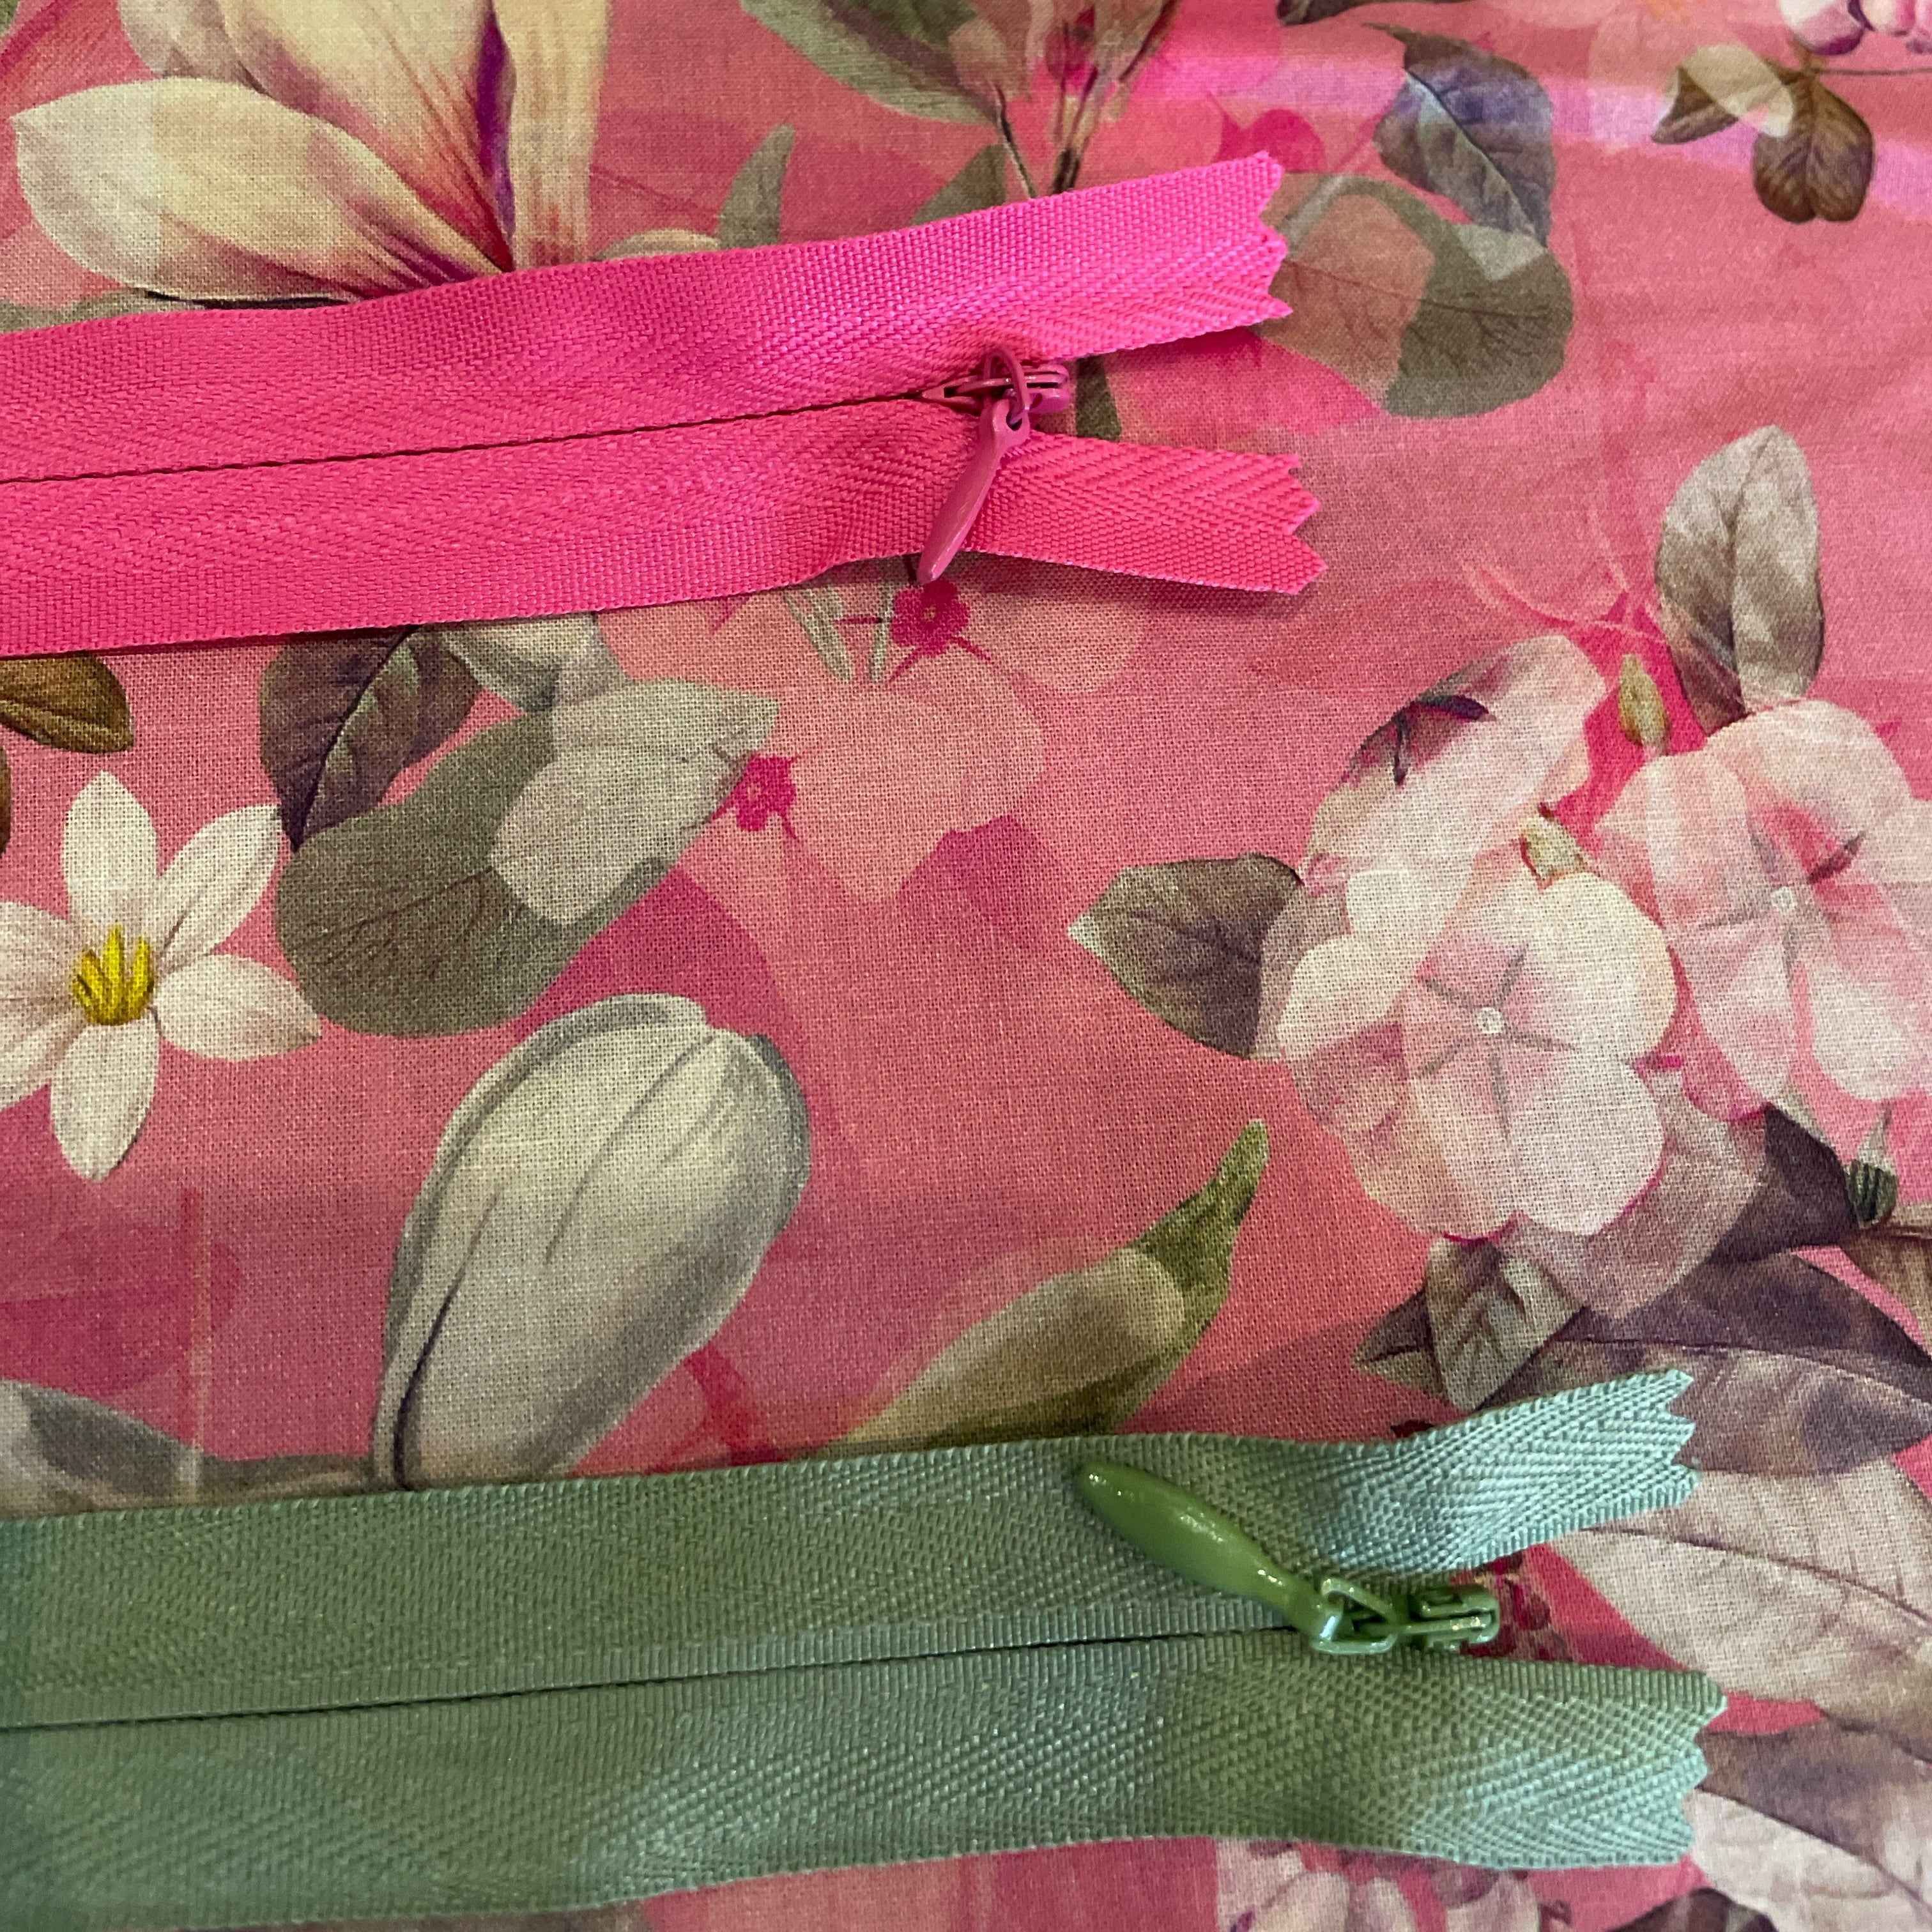 Luxurious rose pink Digital Cotton Lawn floral prints are lightweight and soft with beautiful drape – perfect for dresses, blouses, skirts and crafts. At a width of 135cm / 53" and a weight of 75gsm with matching zippers